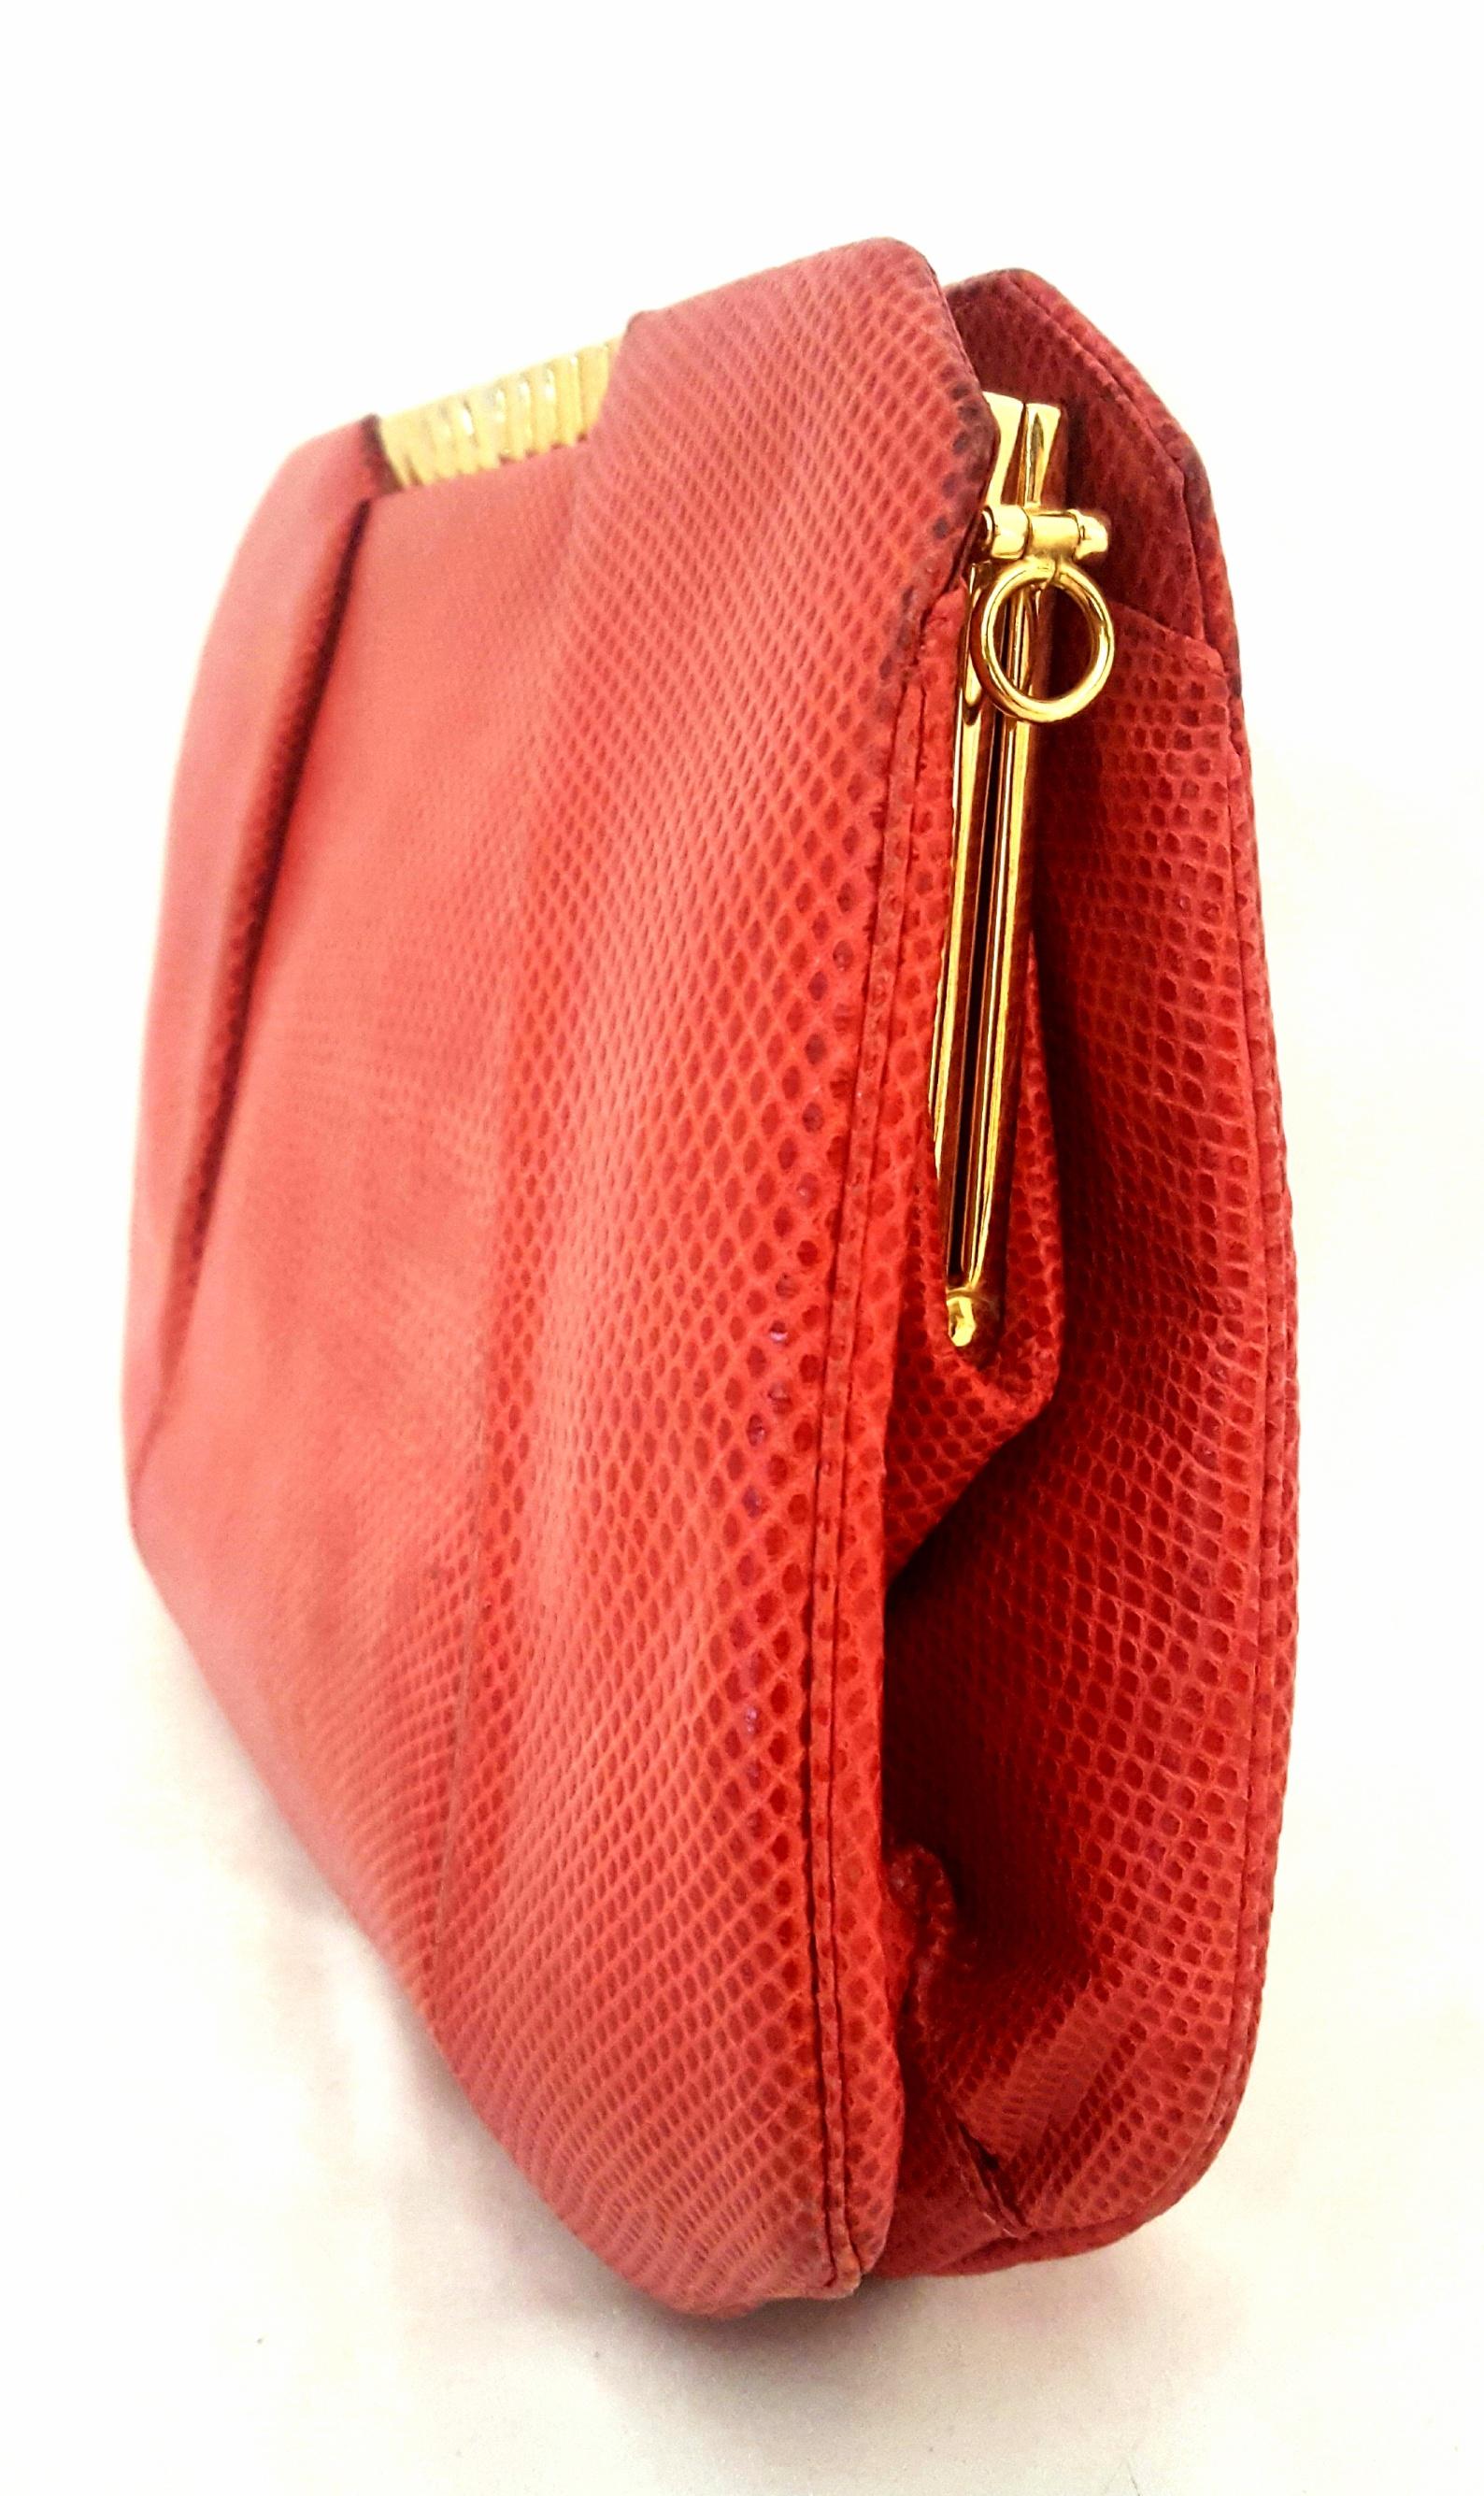 Judith Leiber 1970's Vintage Red Karung Snakeskin Bag In Good Condition For Sale In Palm Beach, FL